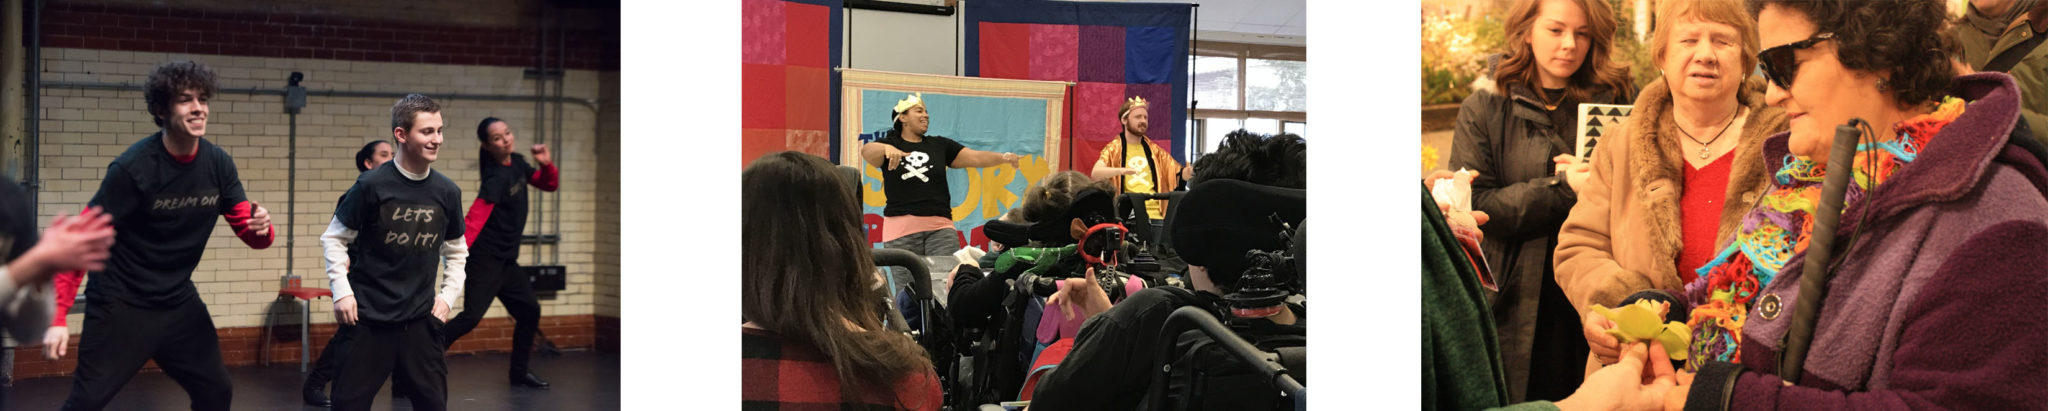 Left Photo: Justin from Overbrook School for the blind performing with tap partner from PA Ballet. Middle Photo: PHS with Story Pirates. Right Photo: Associated services for the blind during Adapted Philadelphia Flower Show tour 